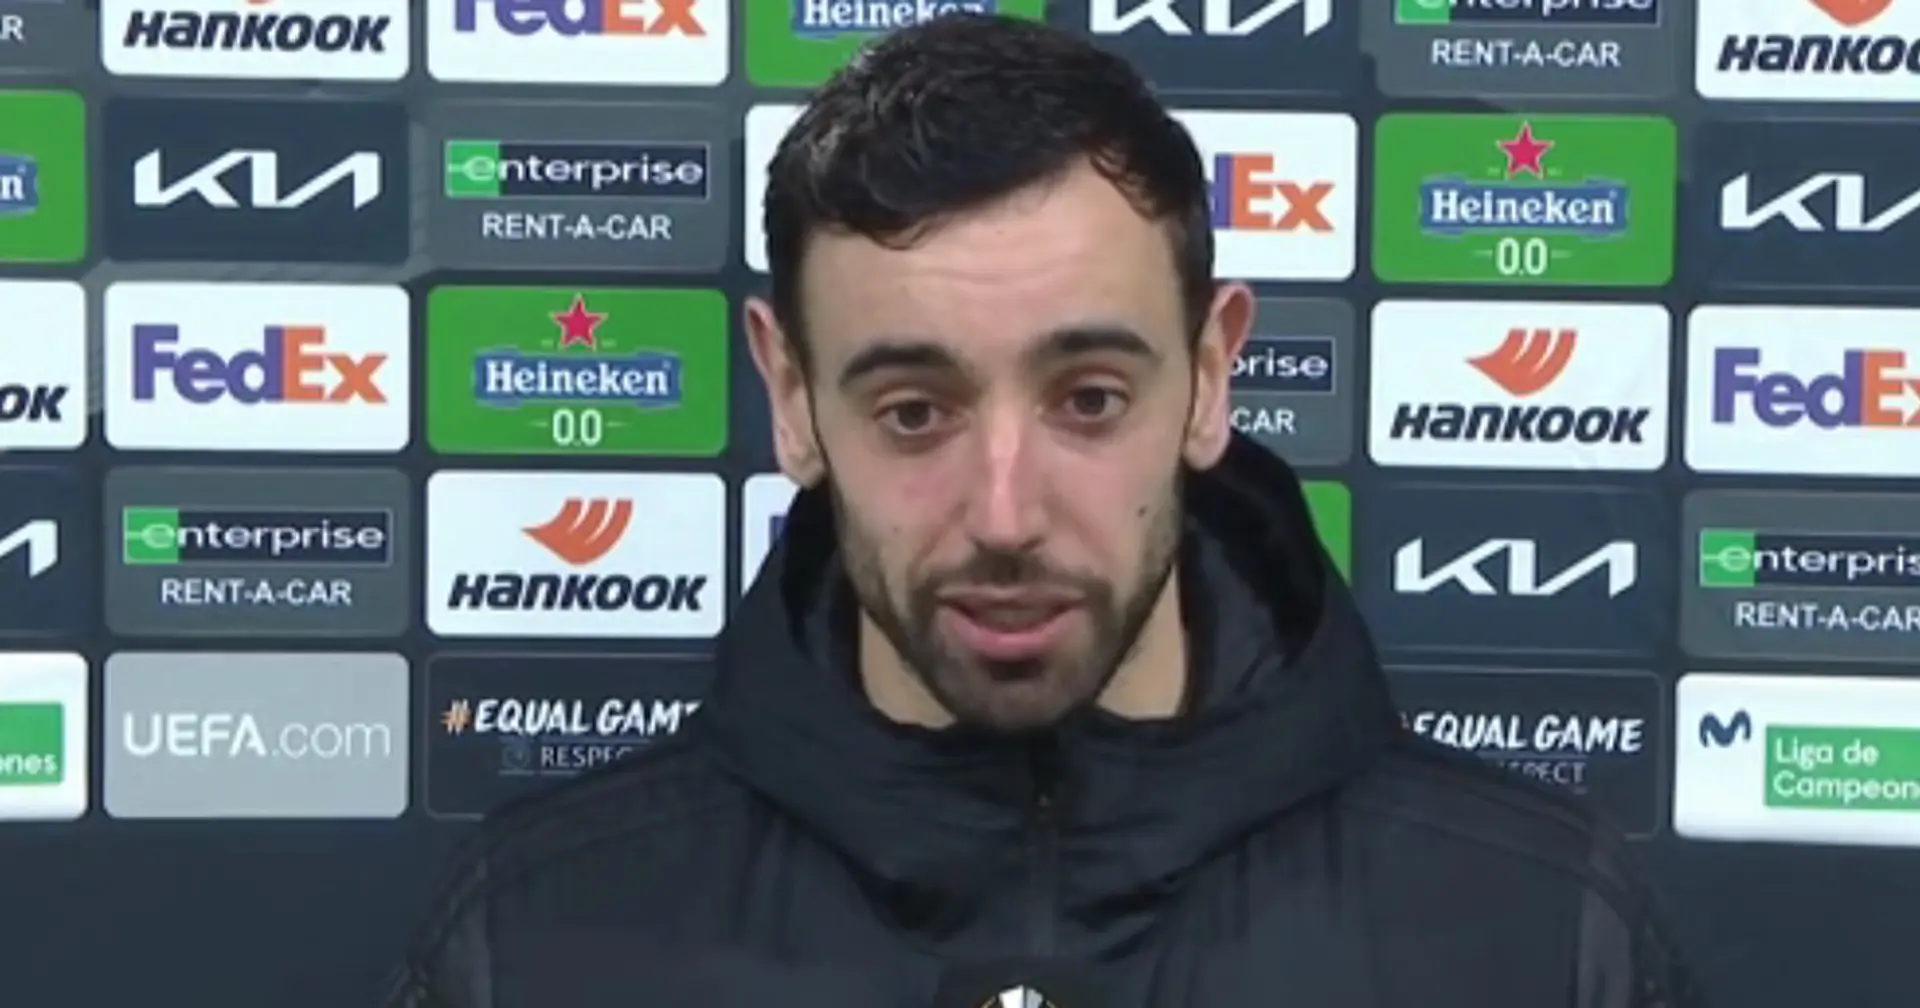 'We have to grow up': Bruno Fernandes calls for even more improvement after Real Sociedad thrashing